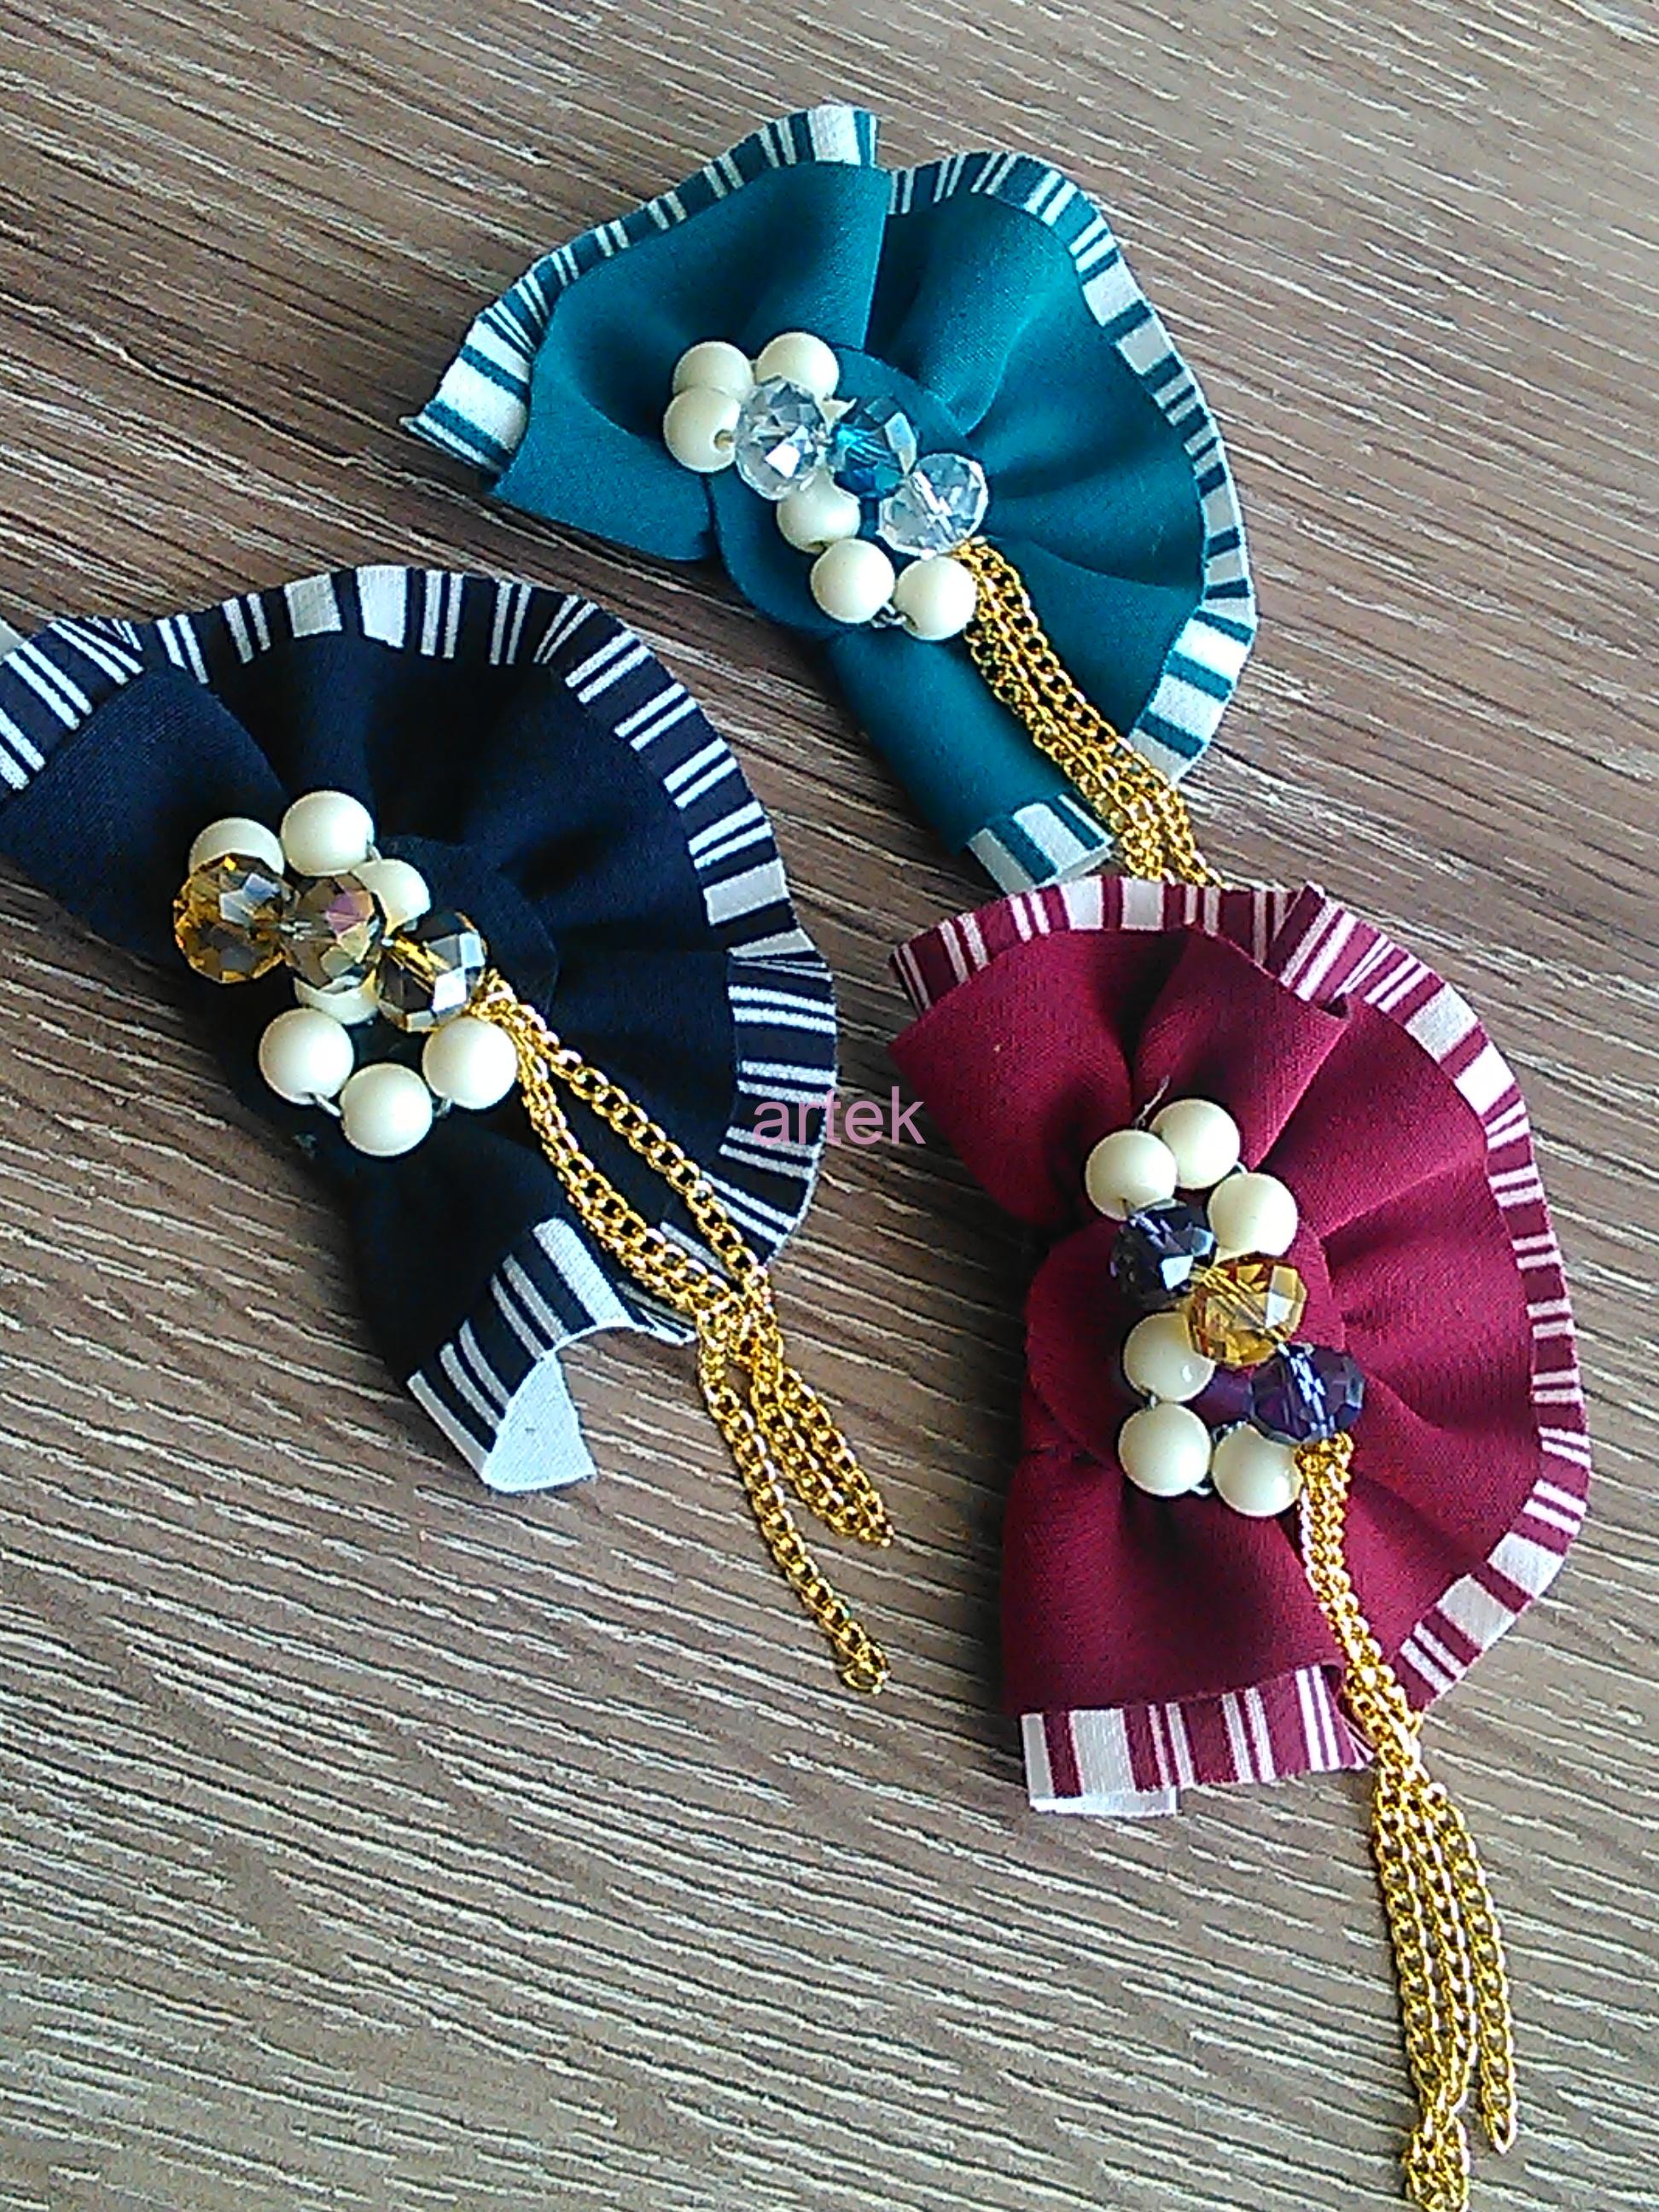 RAMONA beads decorative trim brooche ,made by Artek factory use client fabric 